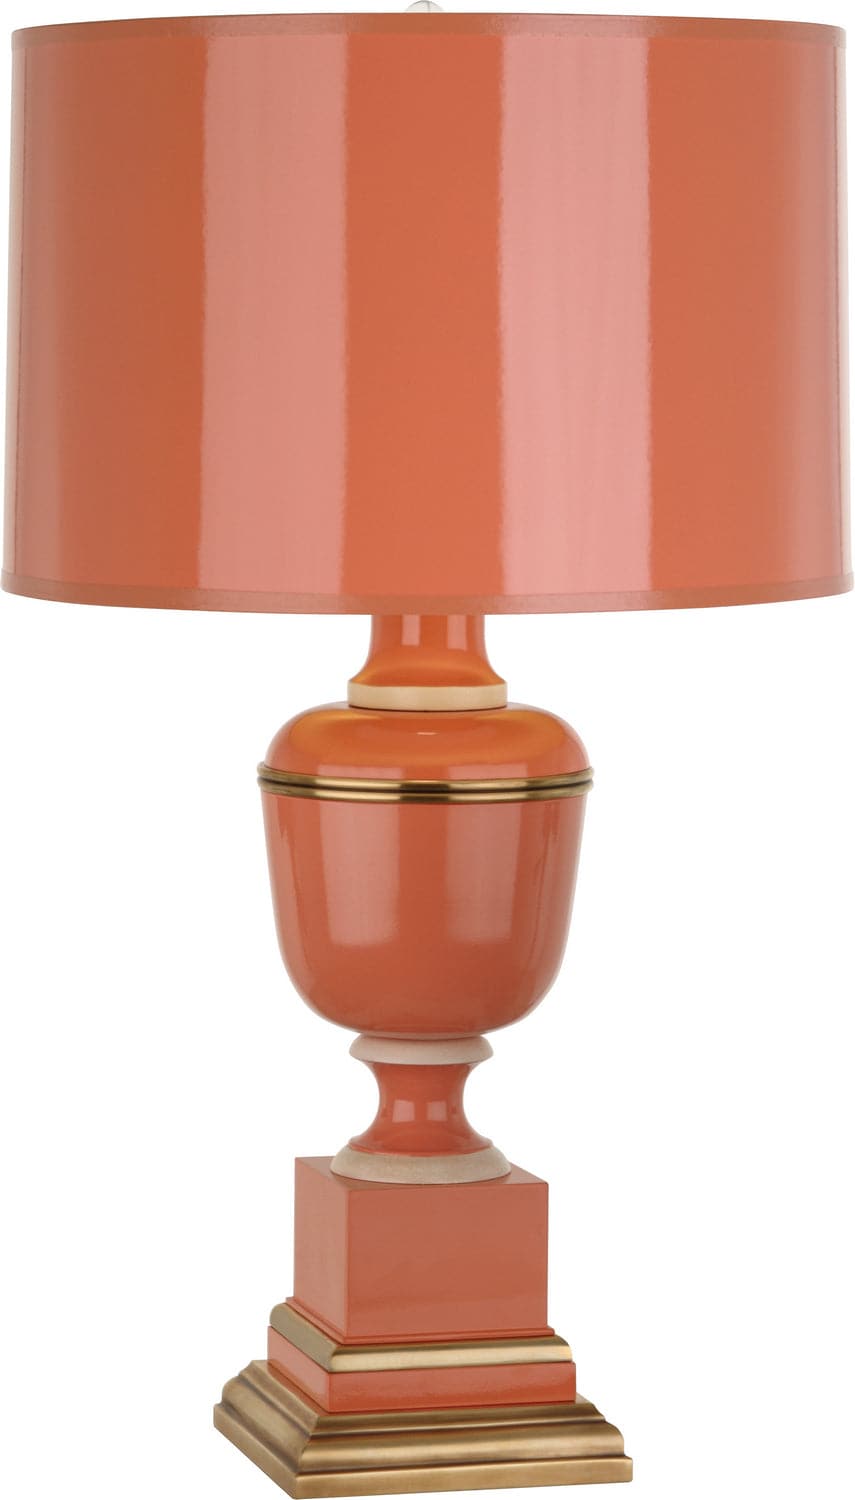 Robert Abbey - 2603 - One Light Accent Lamp - Annika - Tangerine Lacquered Paint w/Natural Brass and Ivory Crackle